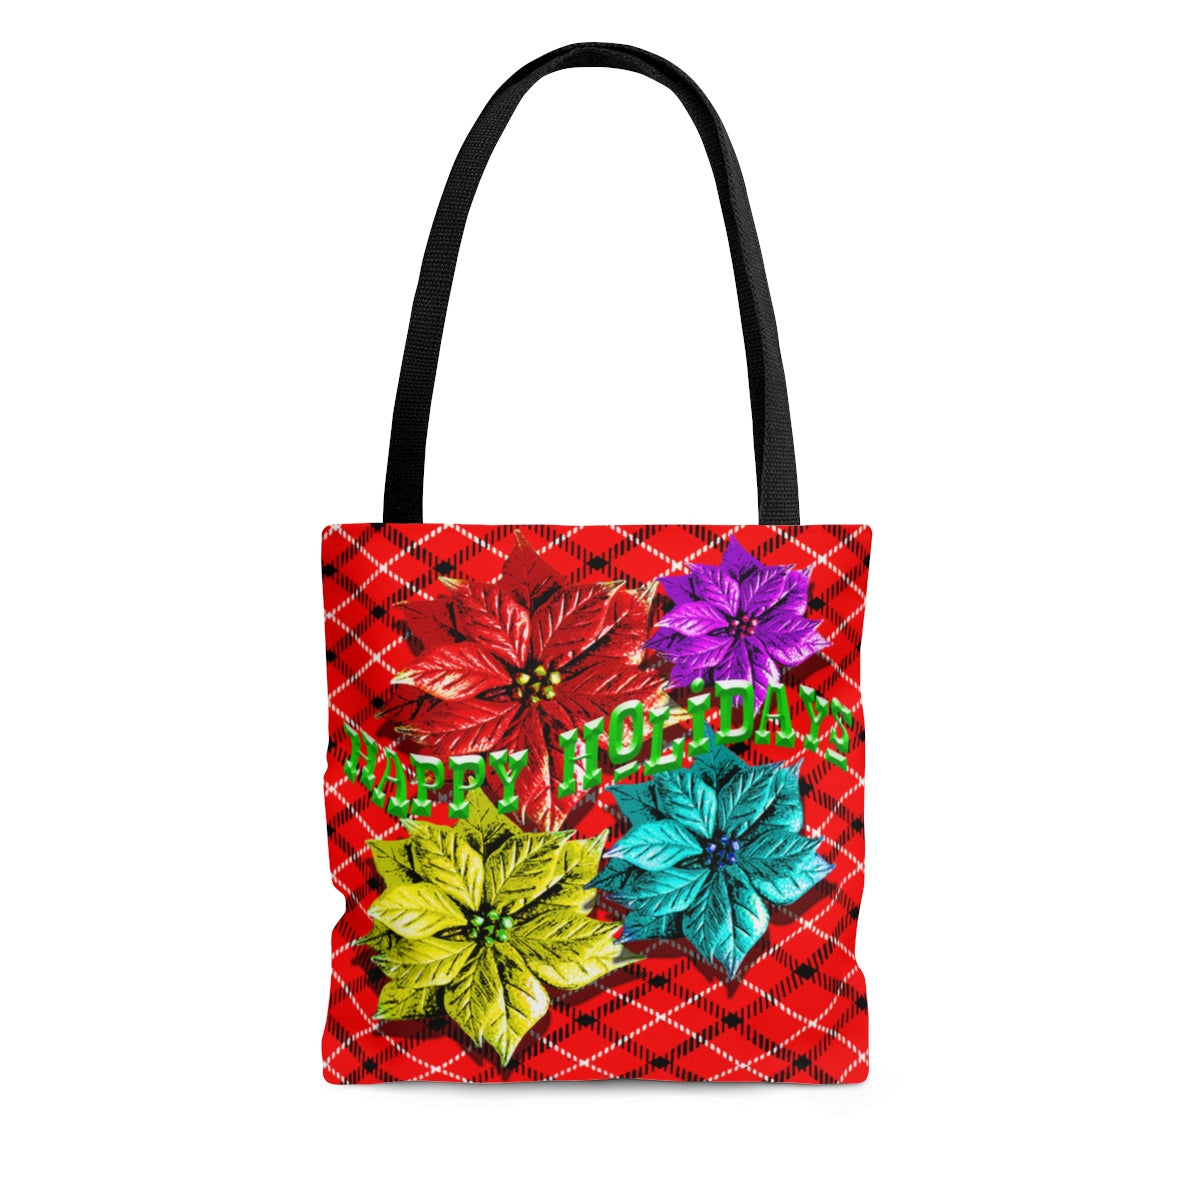 Poinsetta and plaid Tote Bag